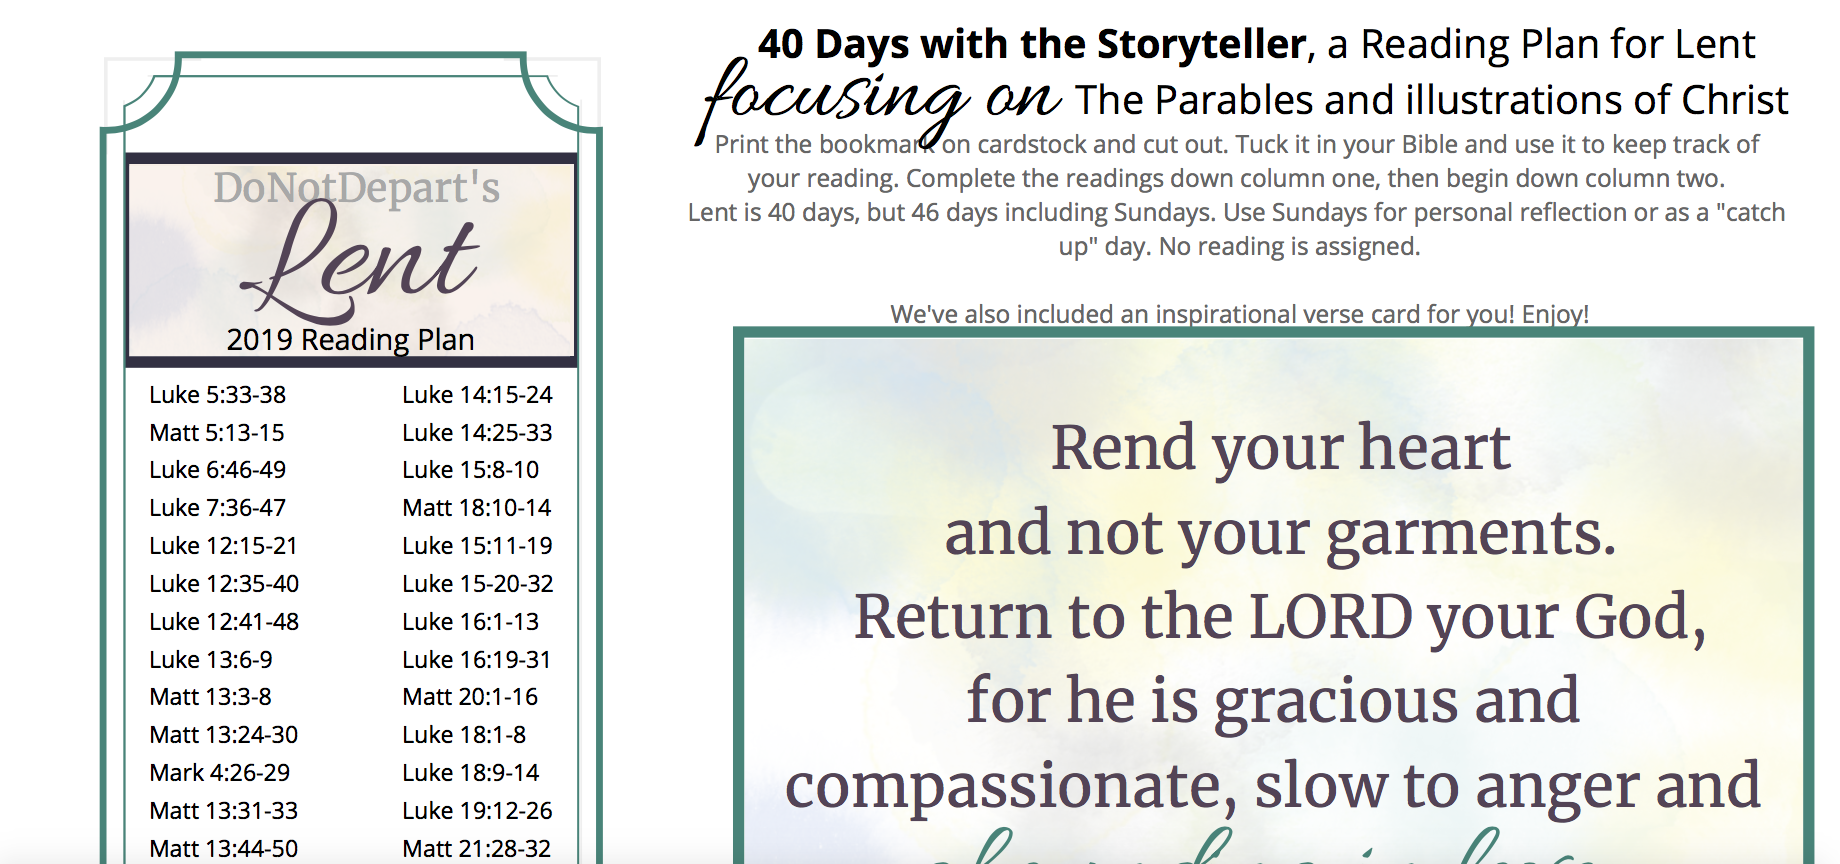 Lent Reading Plan printable bookmark and verse image at DoNotDepart.com